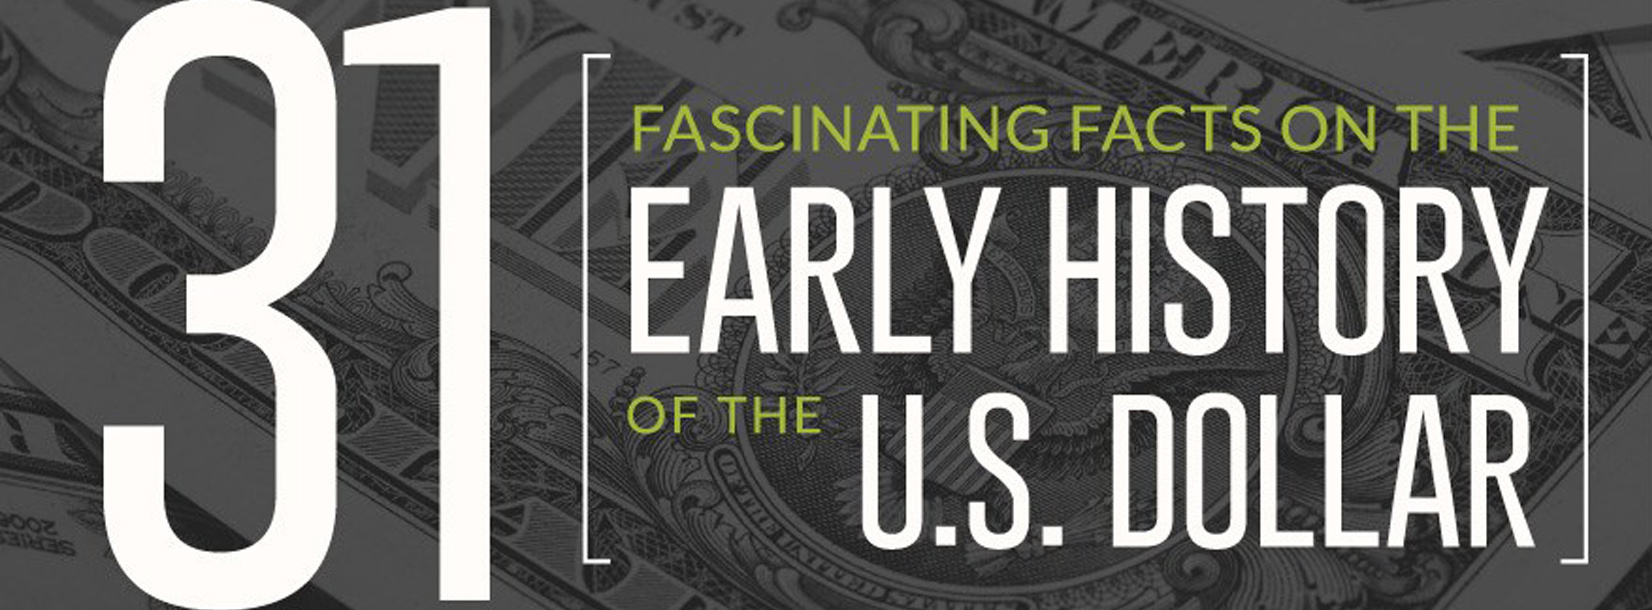 31 Fascinating Facts on the Early History of the U.S. Dollar (Infographic)